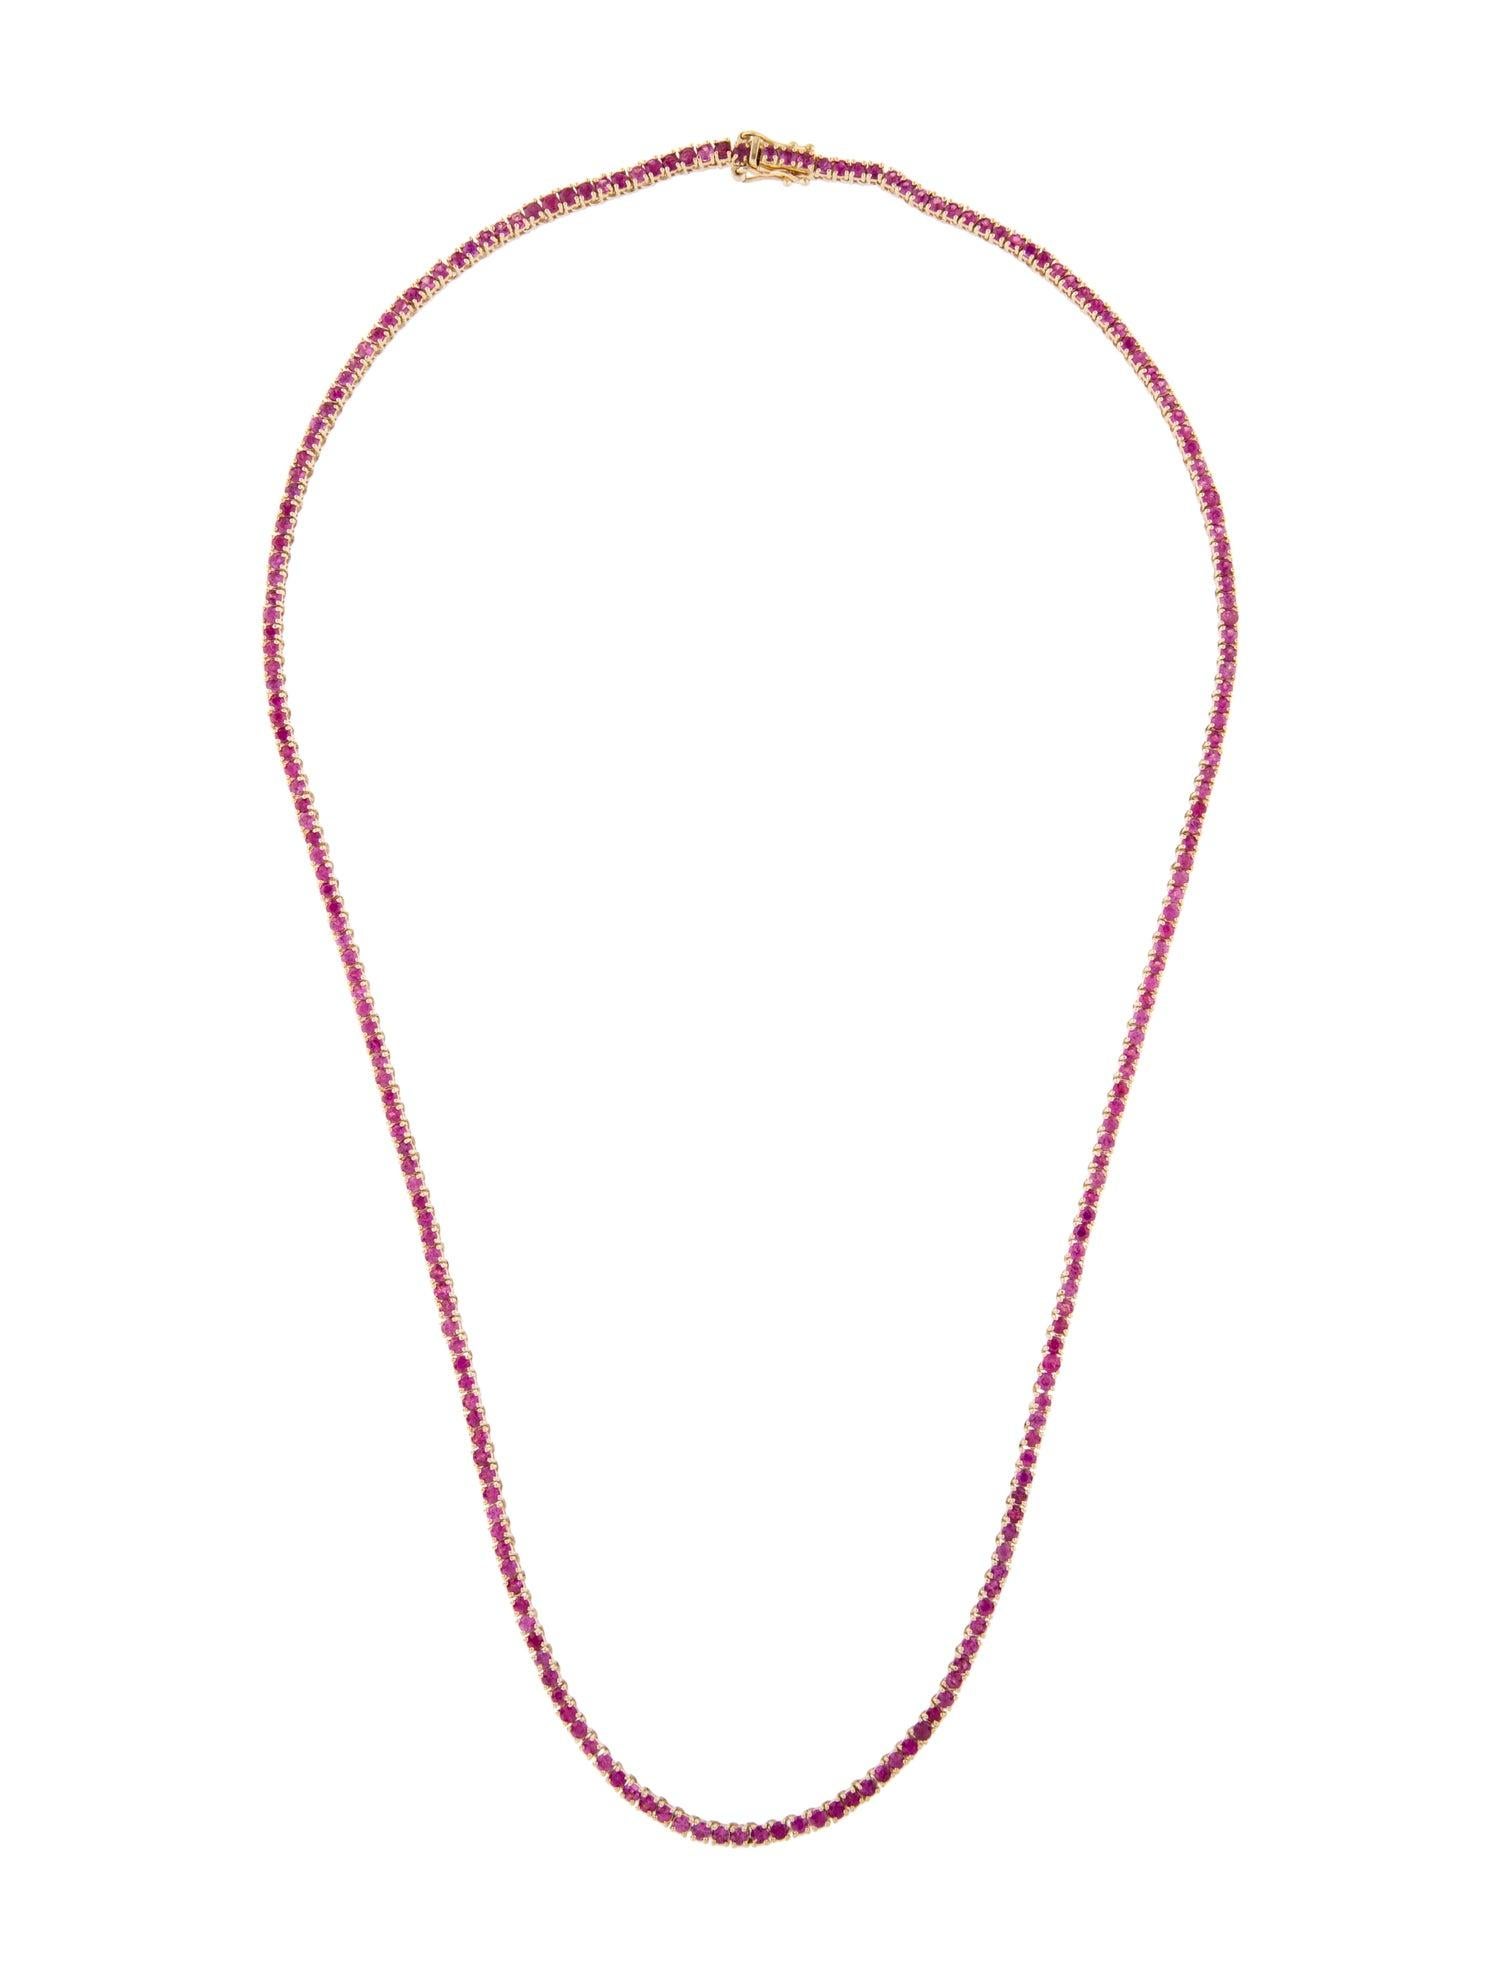 14K Ruby Chain Necklace 12.15ctw - Exquisite Jewelry Piece for Glamorous Style In New Condition For Sale In Holtsville, NY